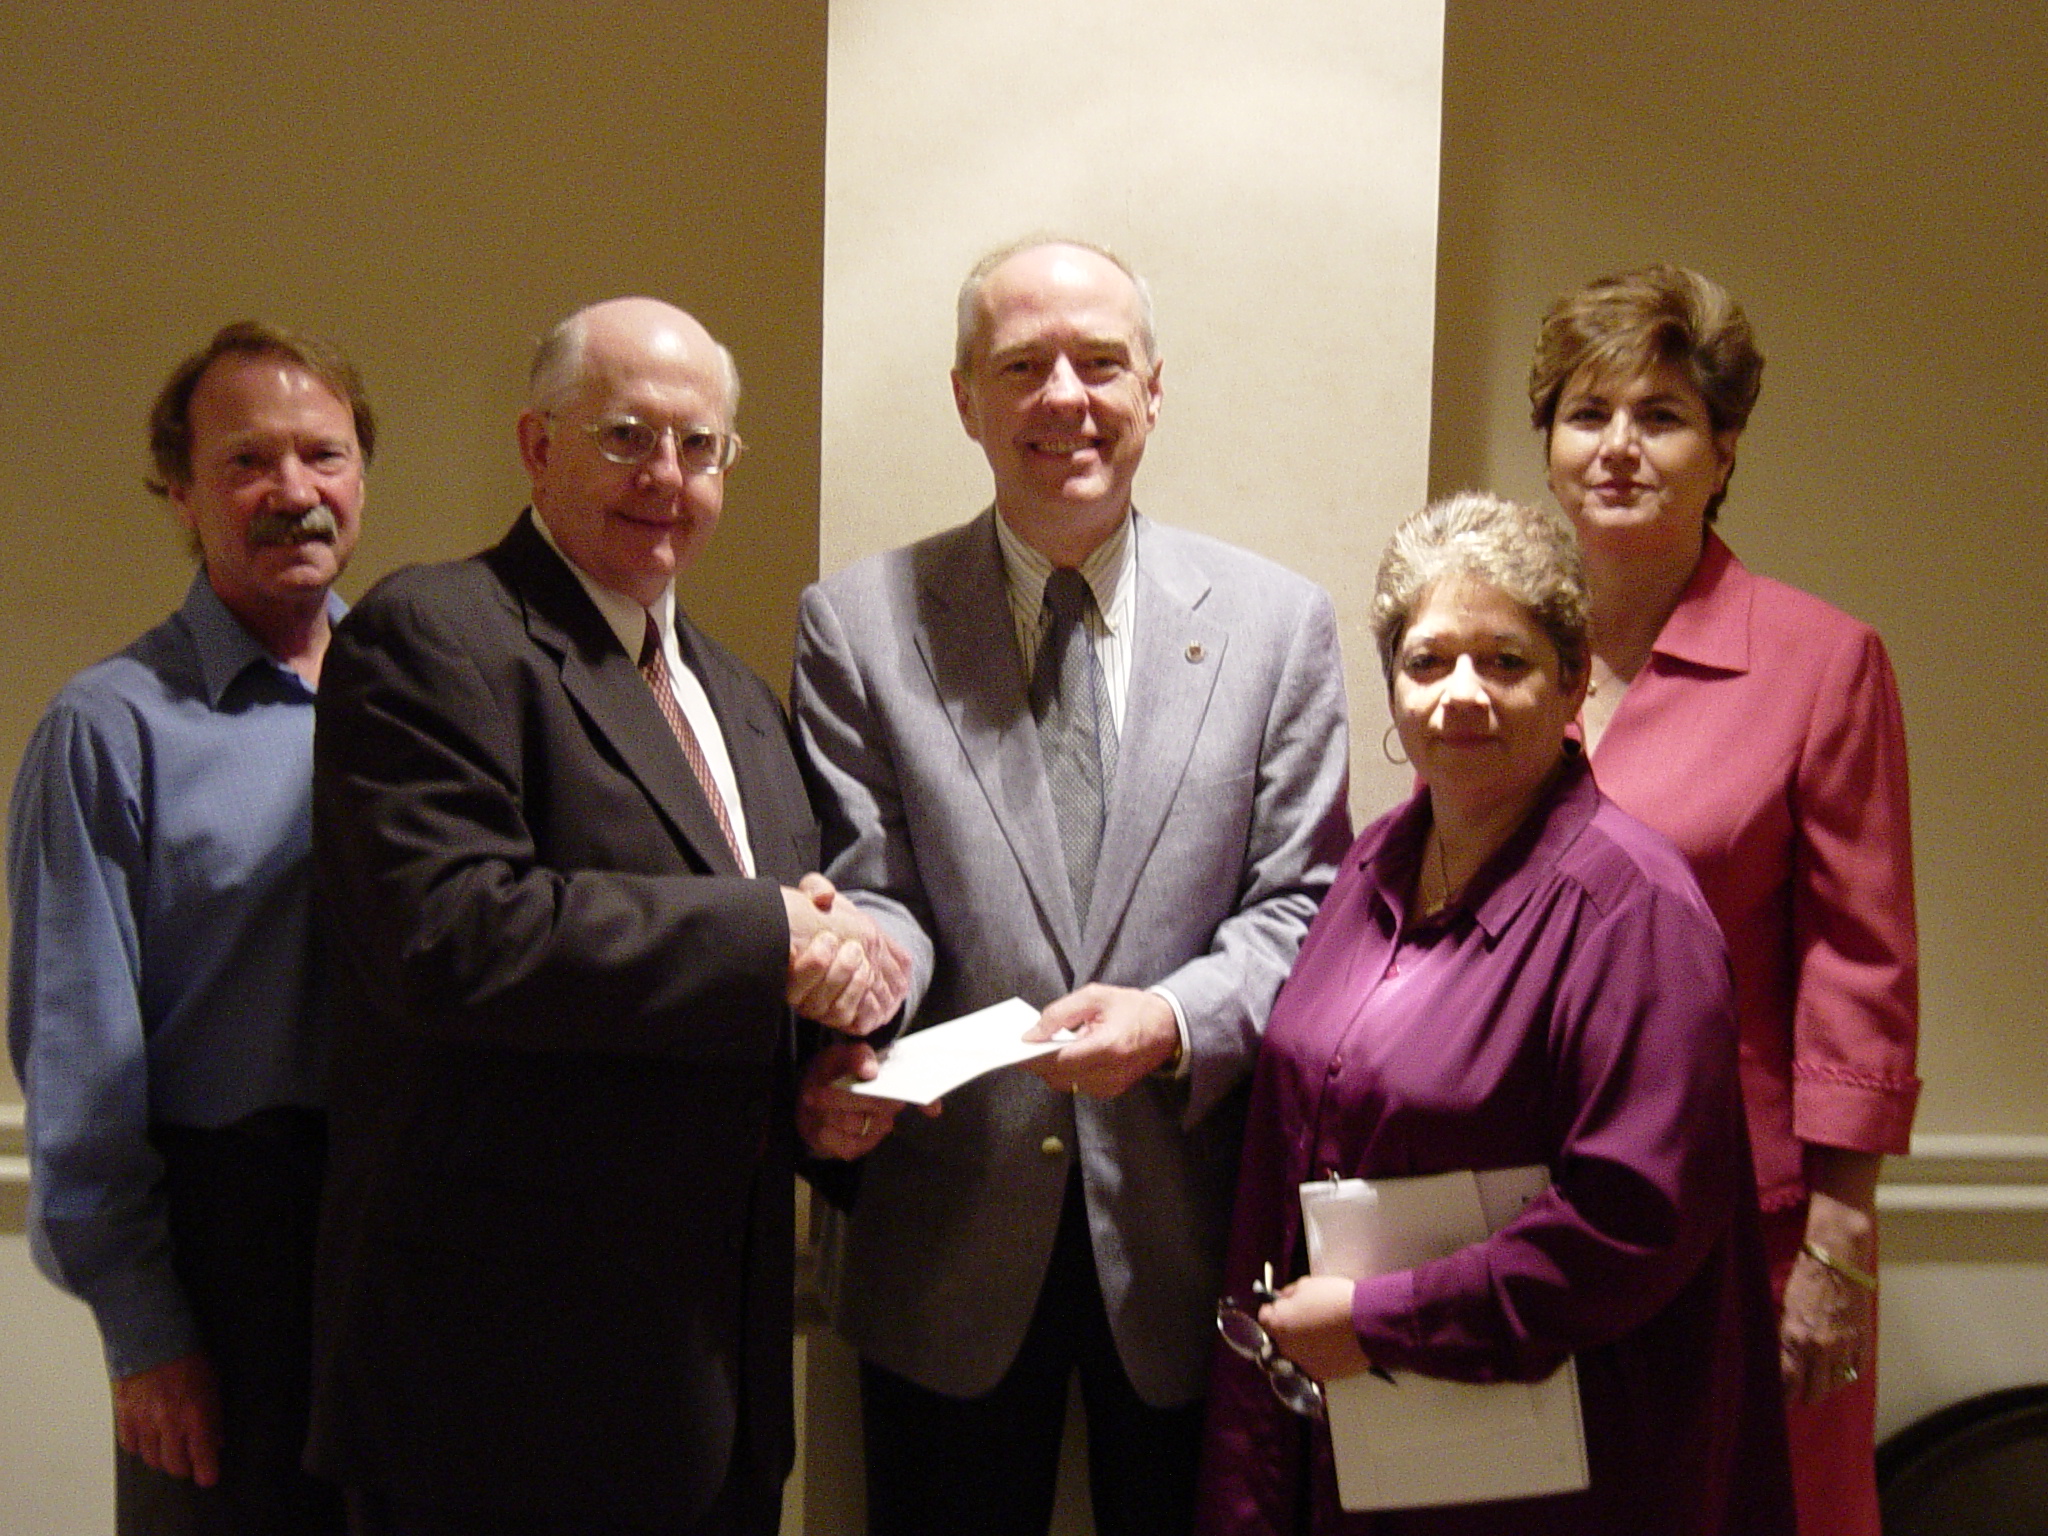 Laredo Manufacturers’ Association president Larry Shaw (second from left), presents a $4,000 gift to Texas A&M International University president Dr. Ray Keck (center). The gift will be used for scholarships and programs at TAMIU. To date, the LMA has provided approximately $200,000 in scholarship funds to TAMIU. Also pictured are Texas Center director Dr. Michael Patrick (far left), LMA scholarship chair D.J. Utterback (second from right) and TAMIU vice president for Institutional Advancement Candy Hein (far right).